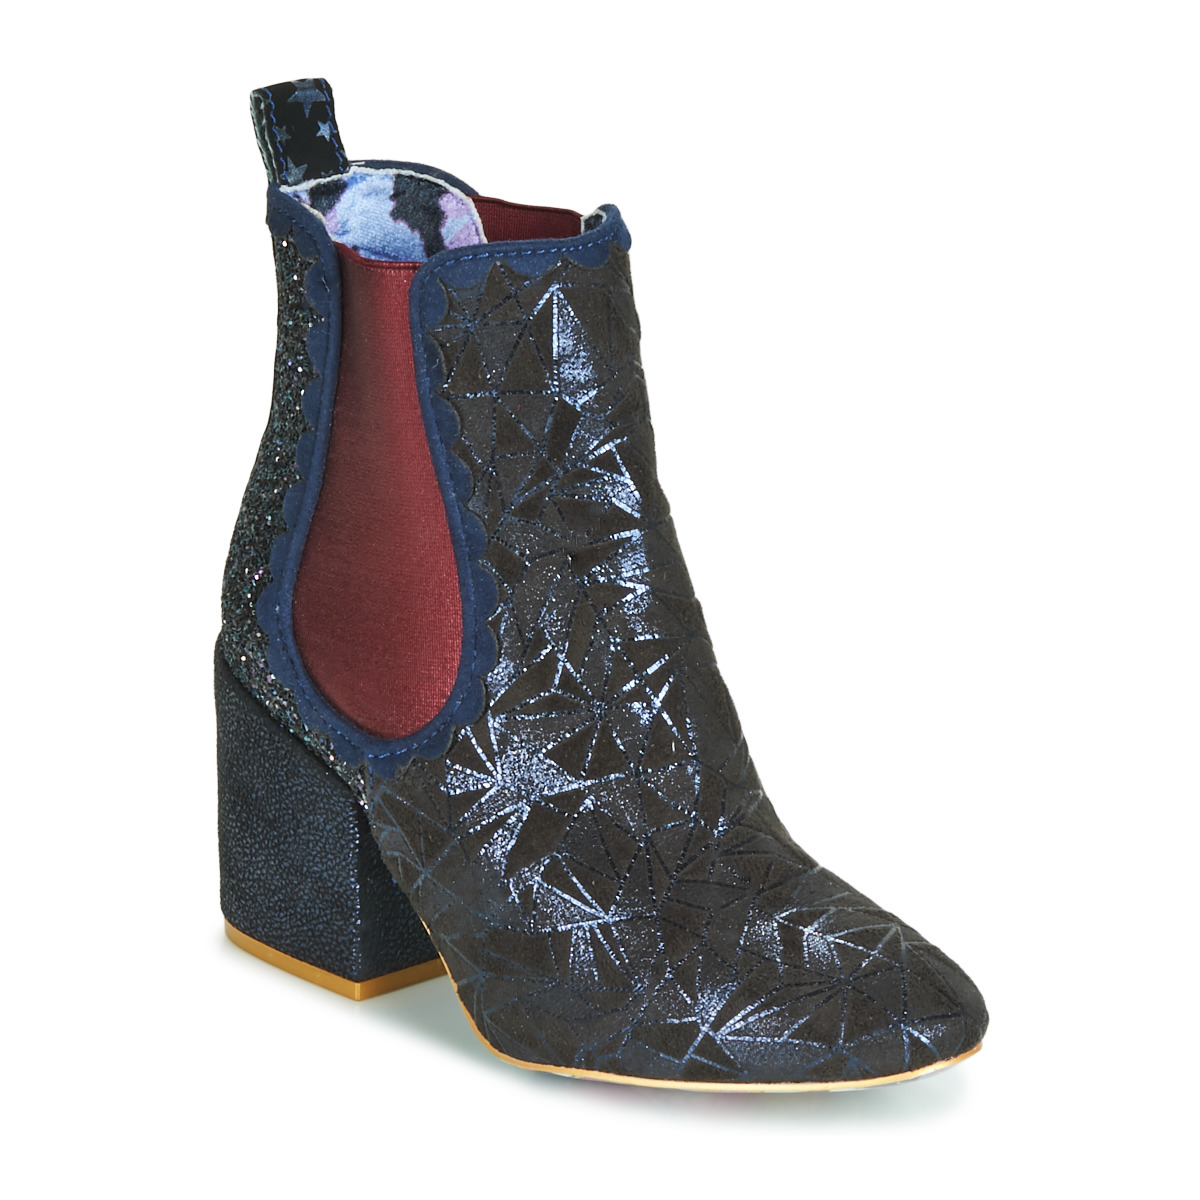 Shoes Women Ankle boots Irregular Choice KINGS ROAD Navy